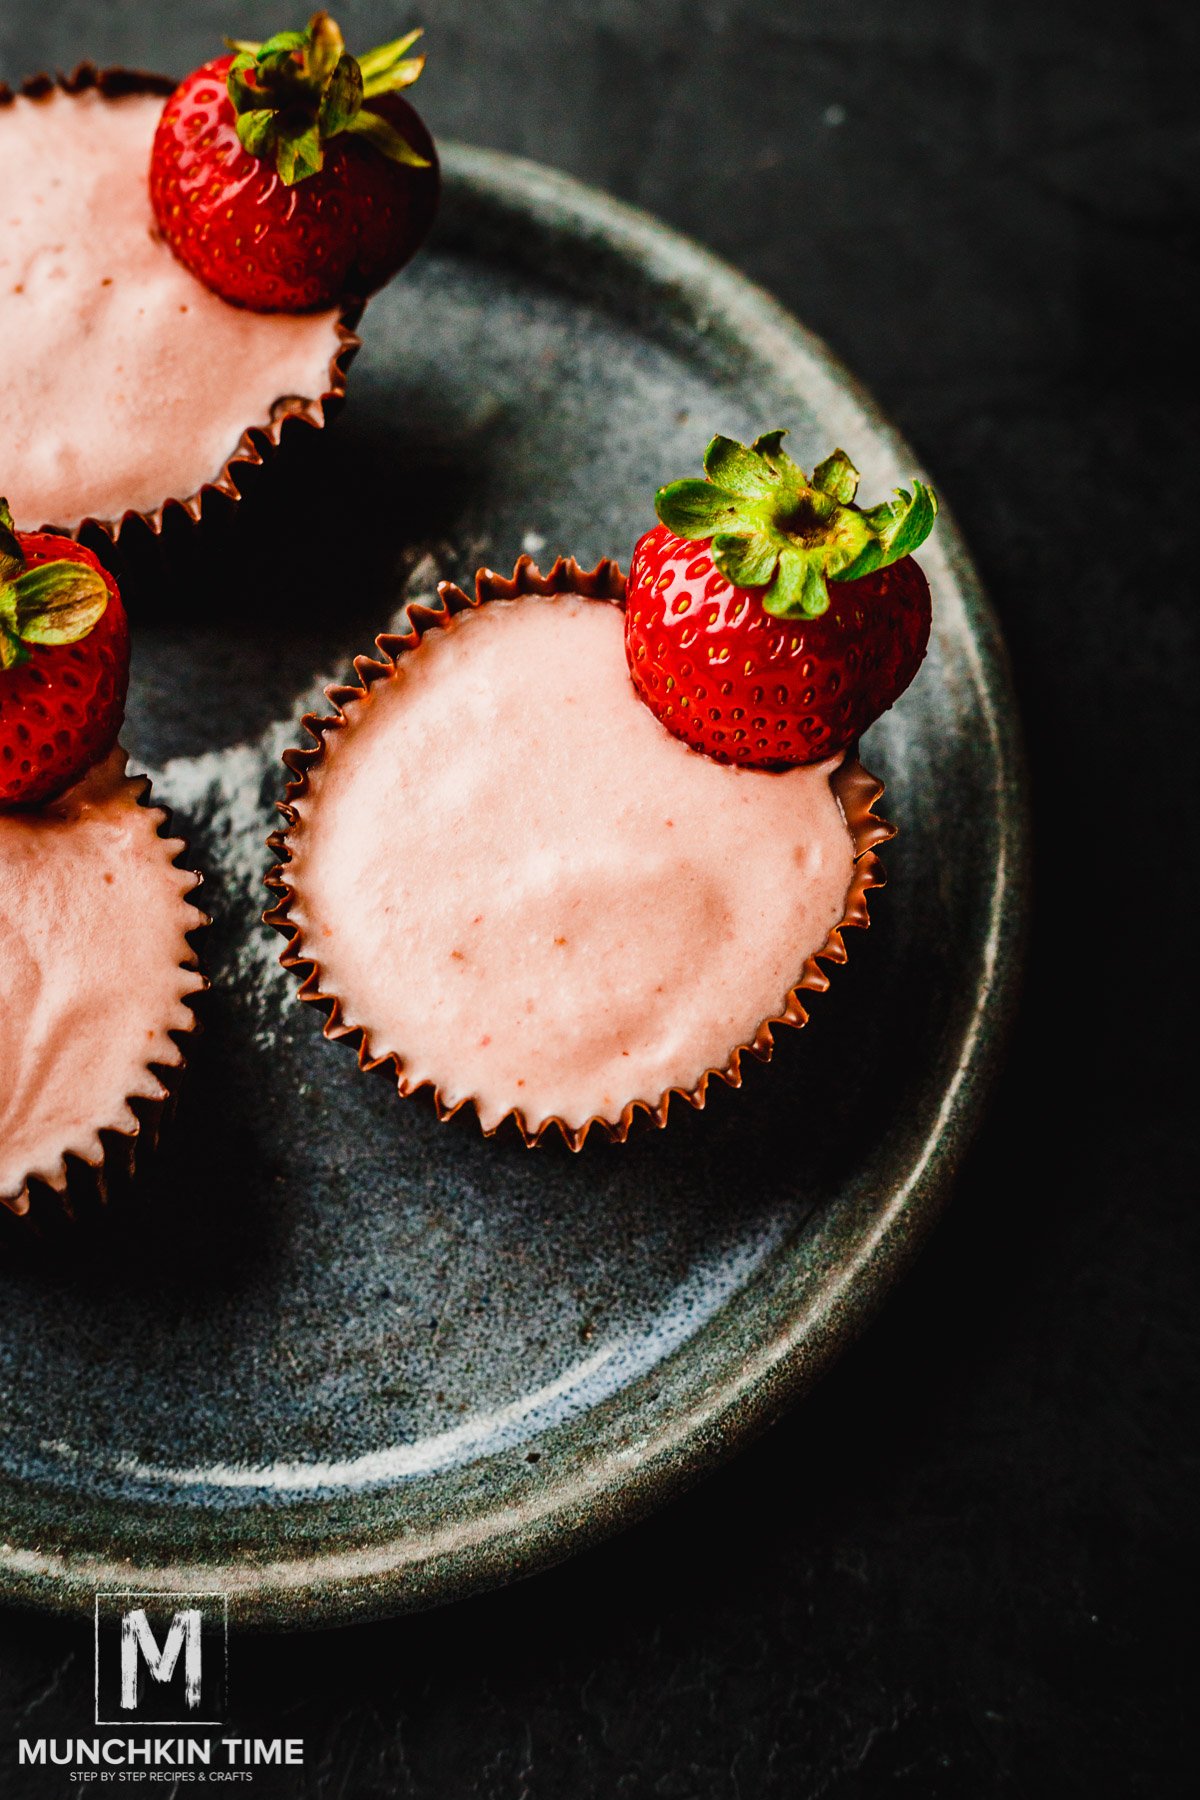 How to Make Strawberry Mousse in Chocolate Cups